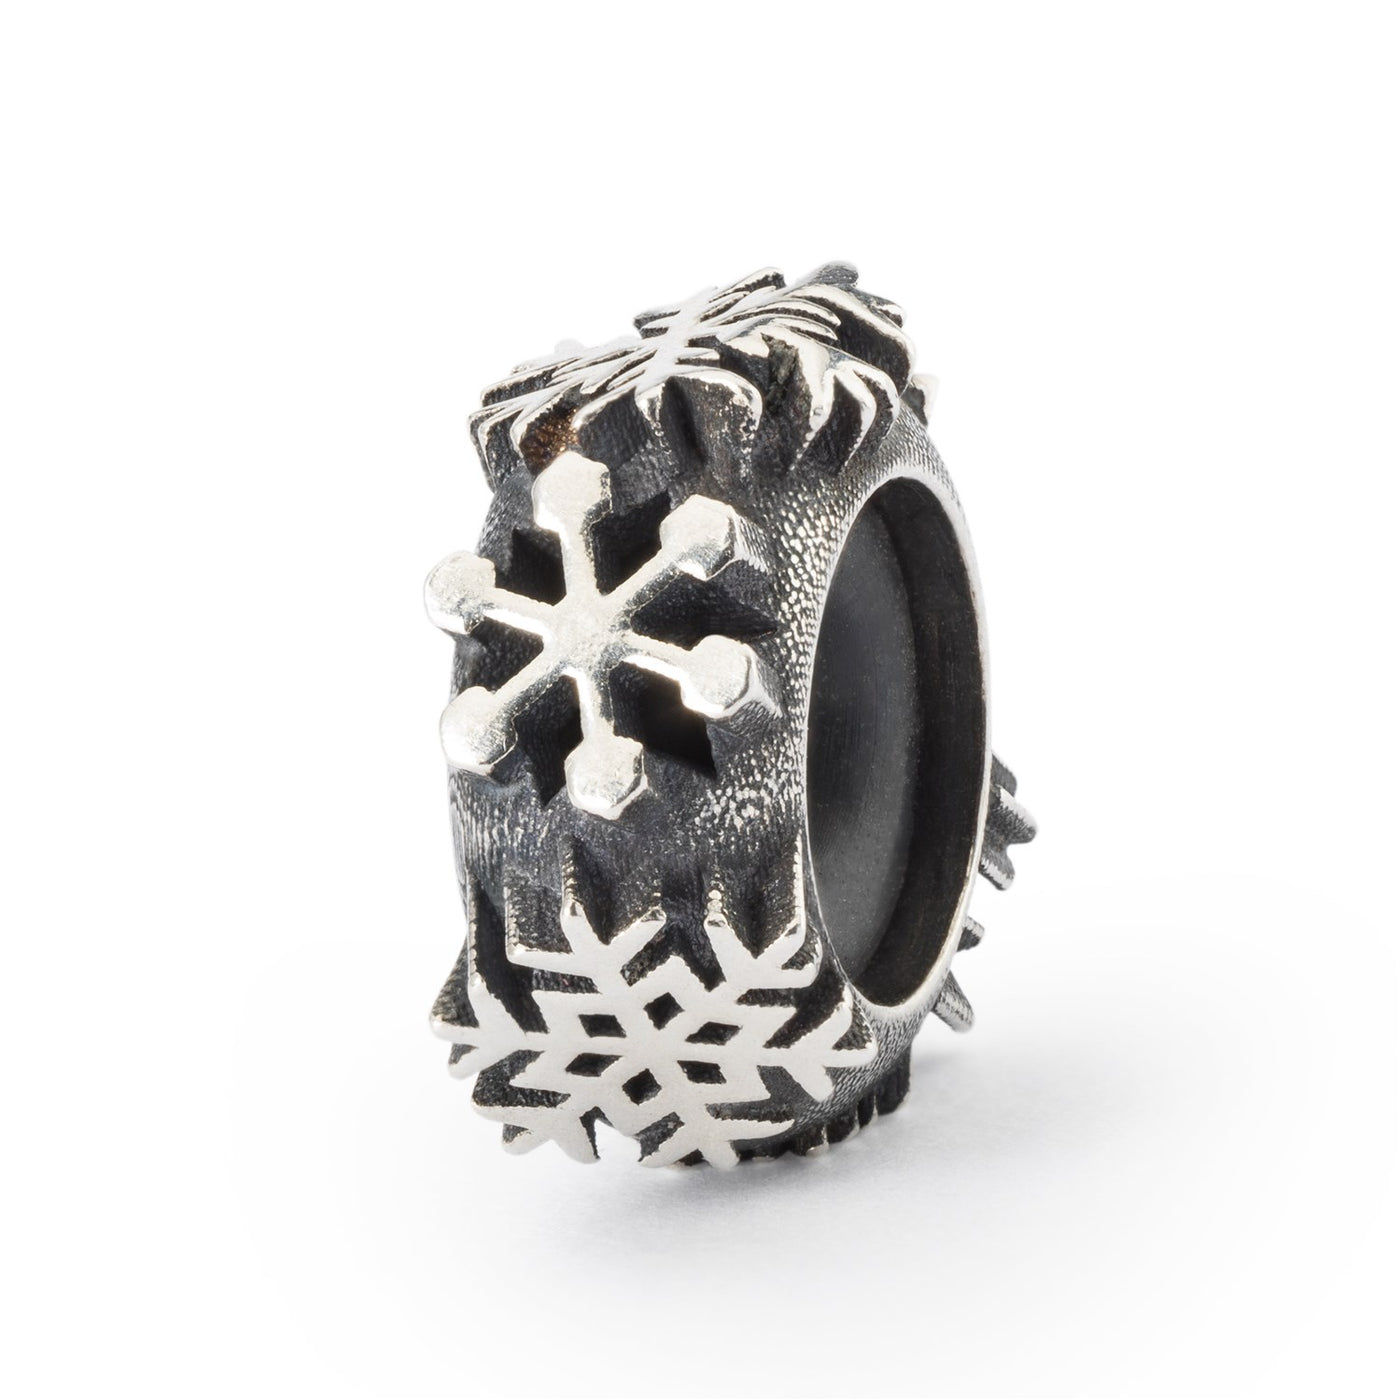 Silver spacer with different designs of snowflakes encrusted all around the spacer. The core of the spacer is made of rubber.